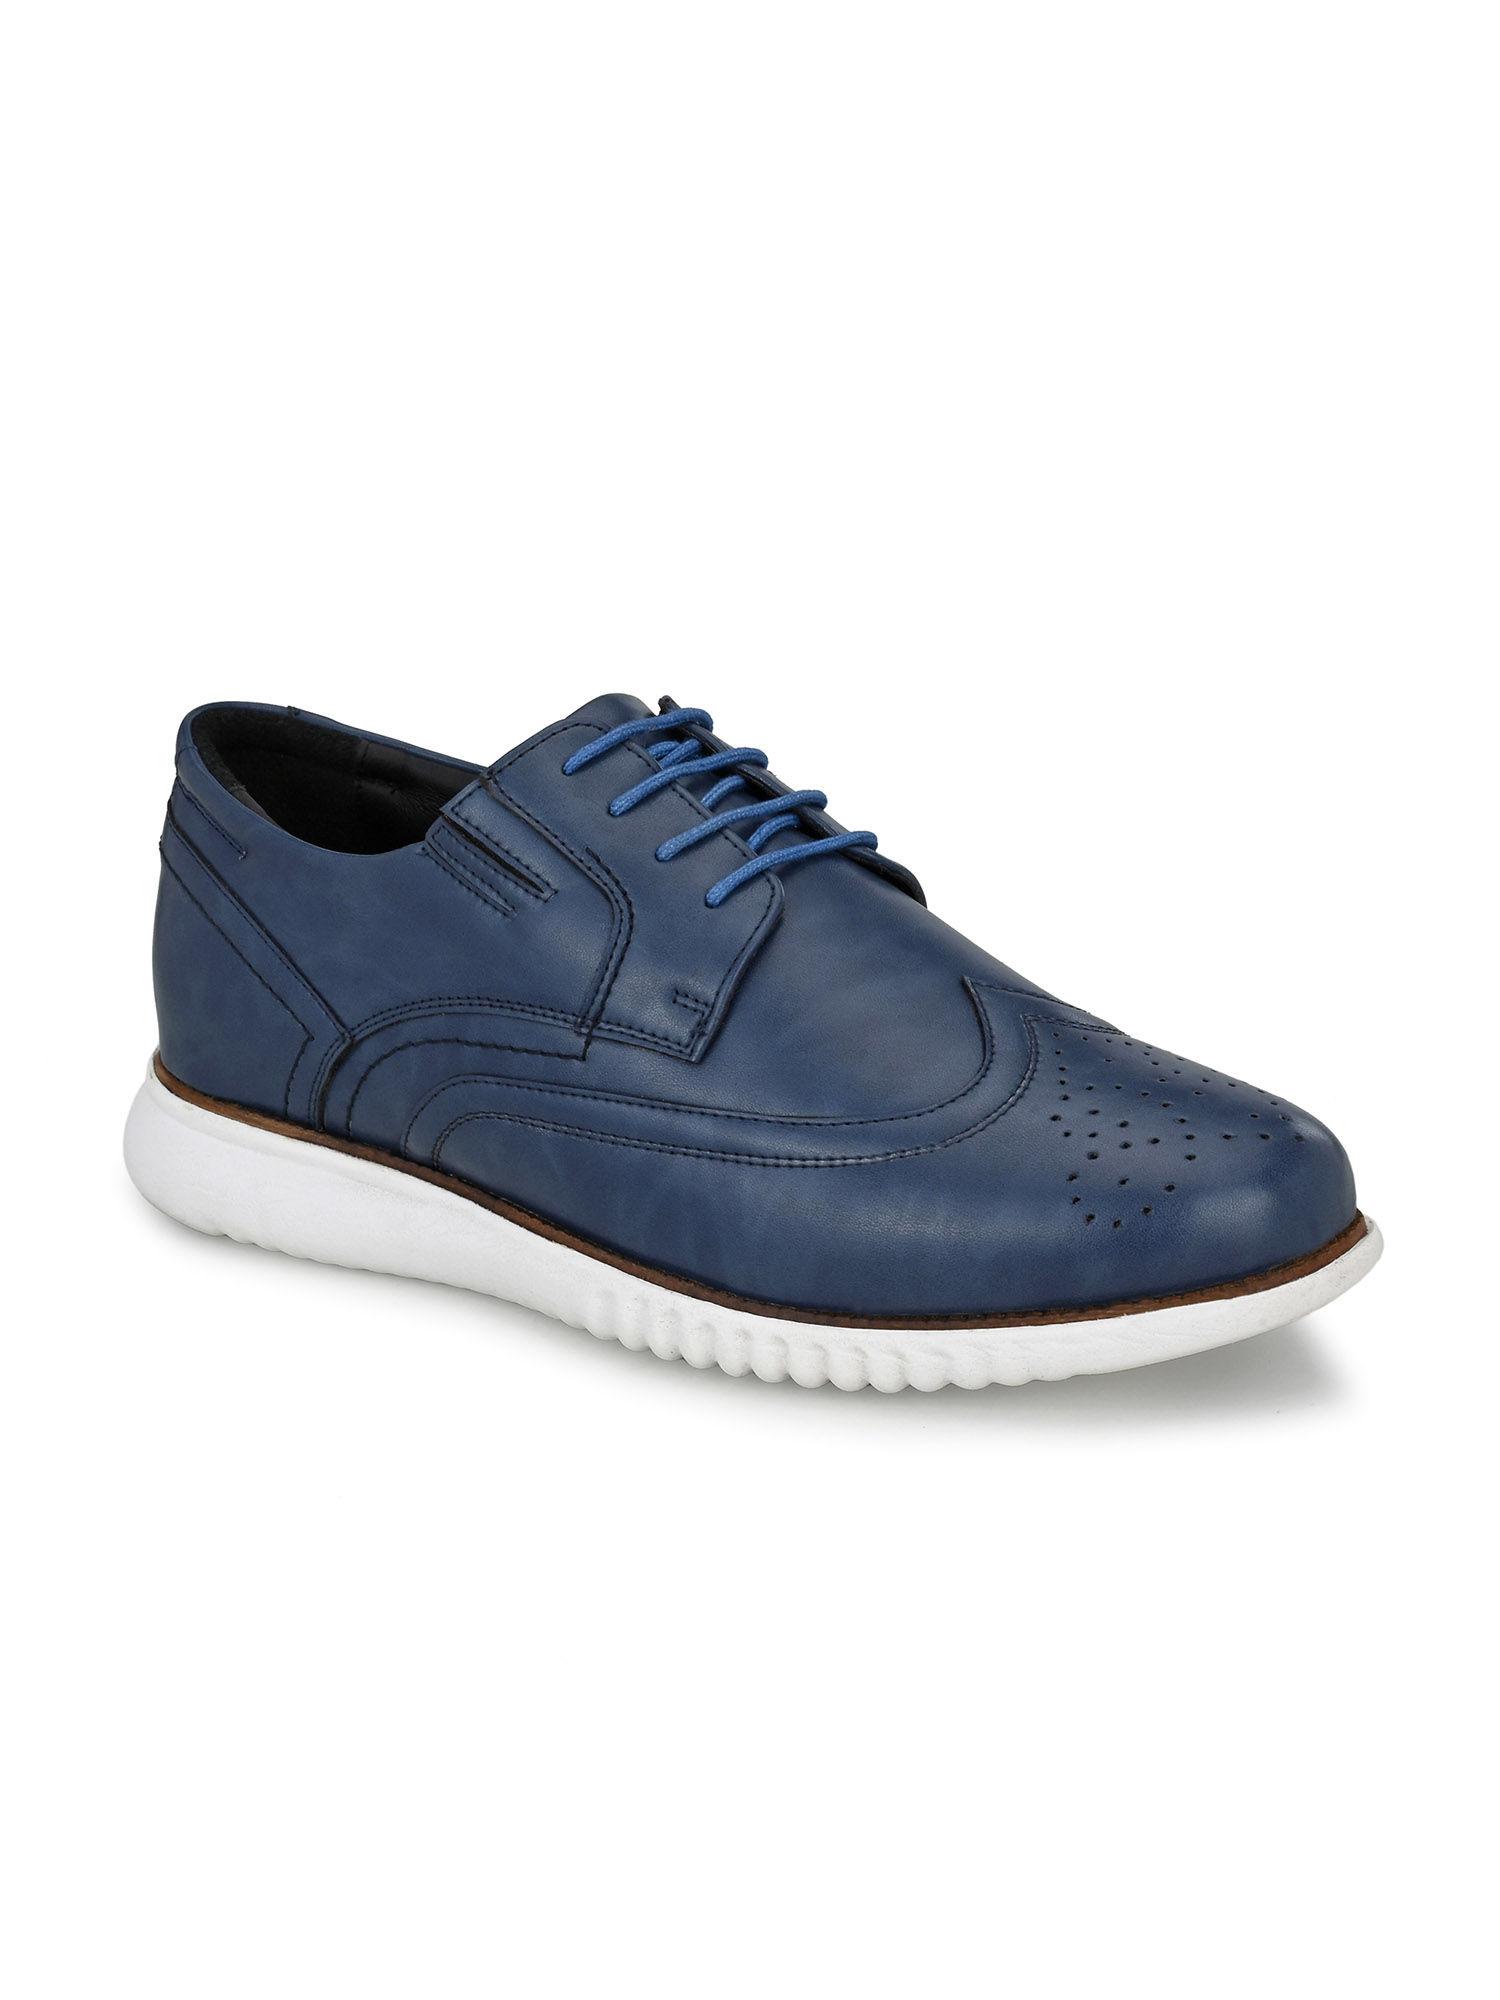 men's blue synthetic lace-up casual shoes